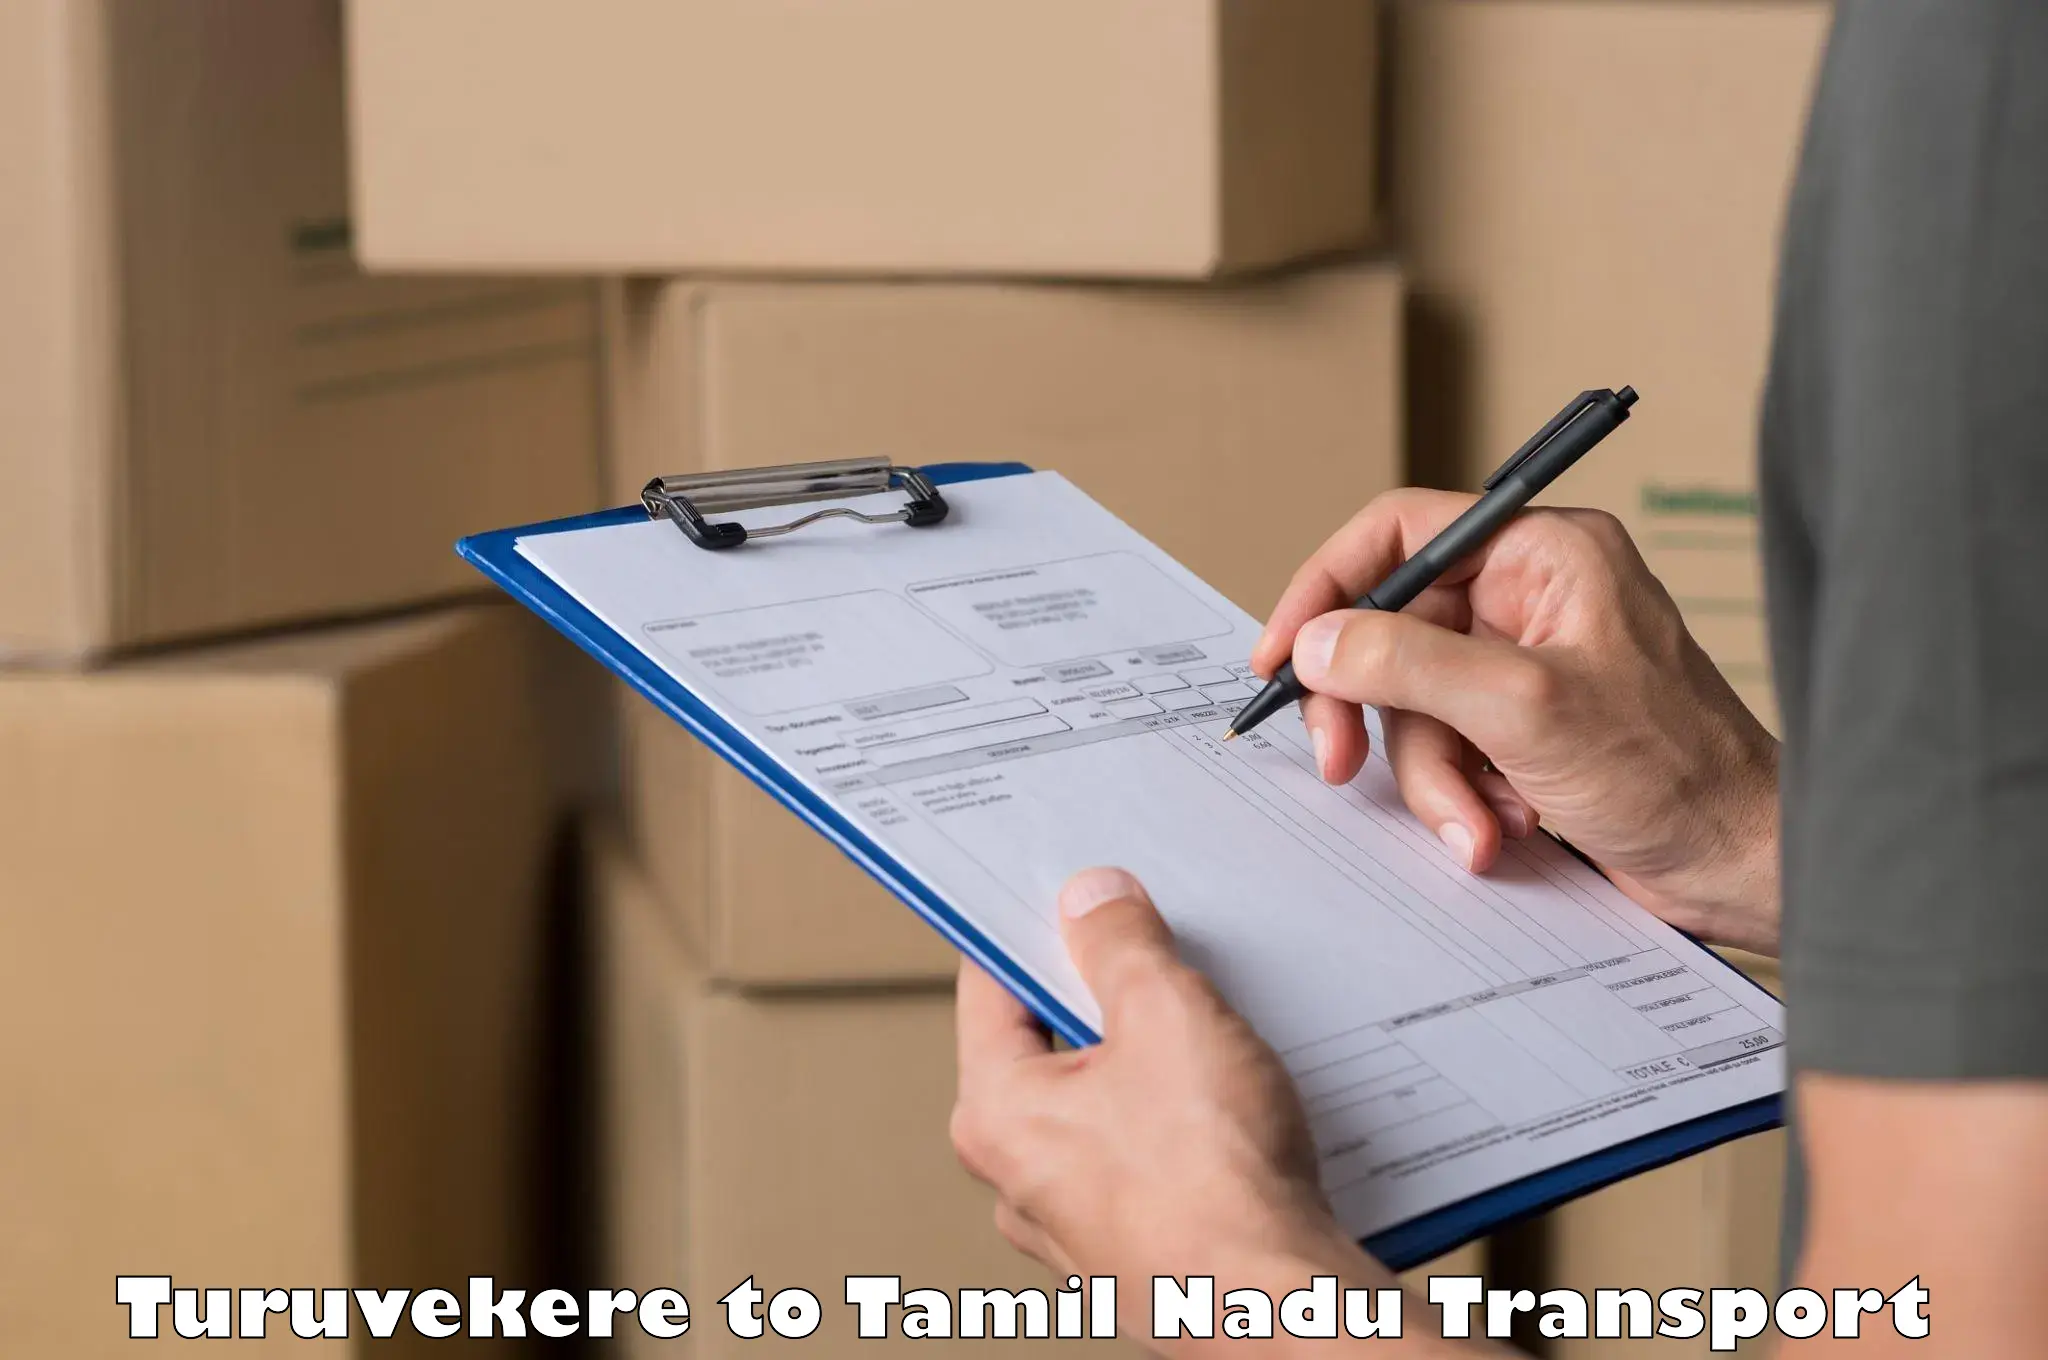 Nearby transport service Turuvekere to Tamil Nadu